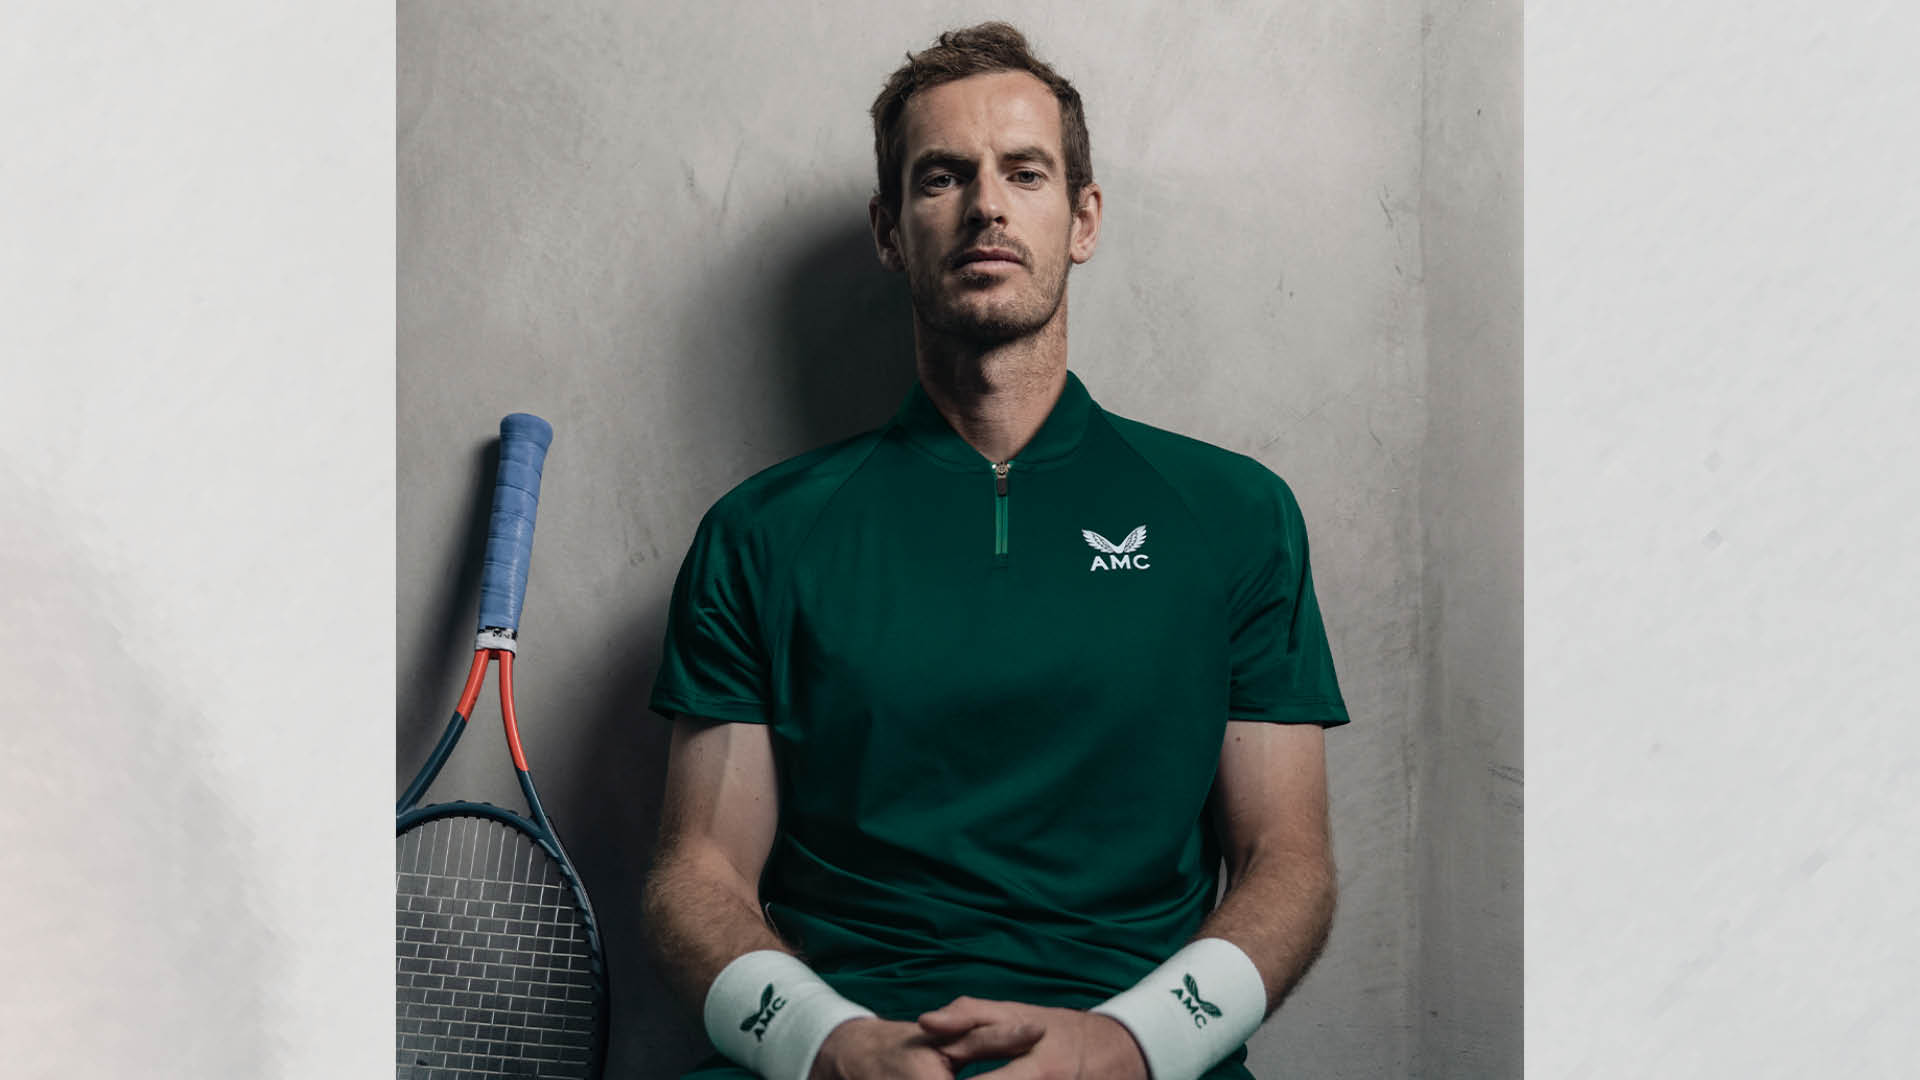 AMC - Tennis Clothing, Andy Murray Collection